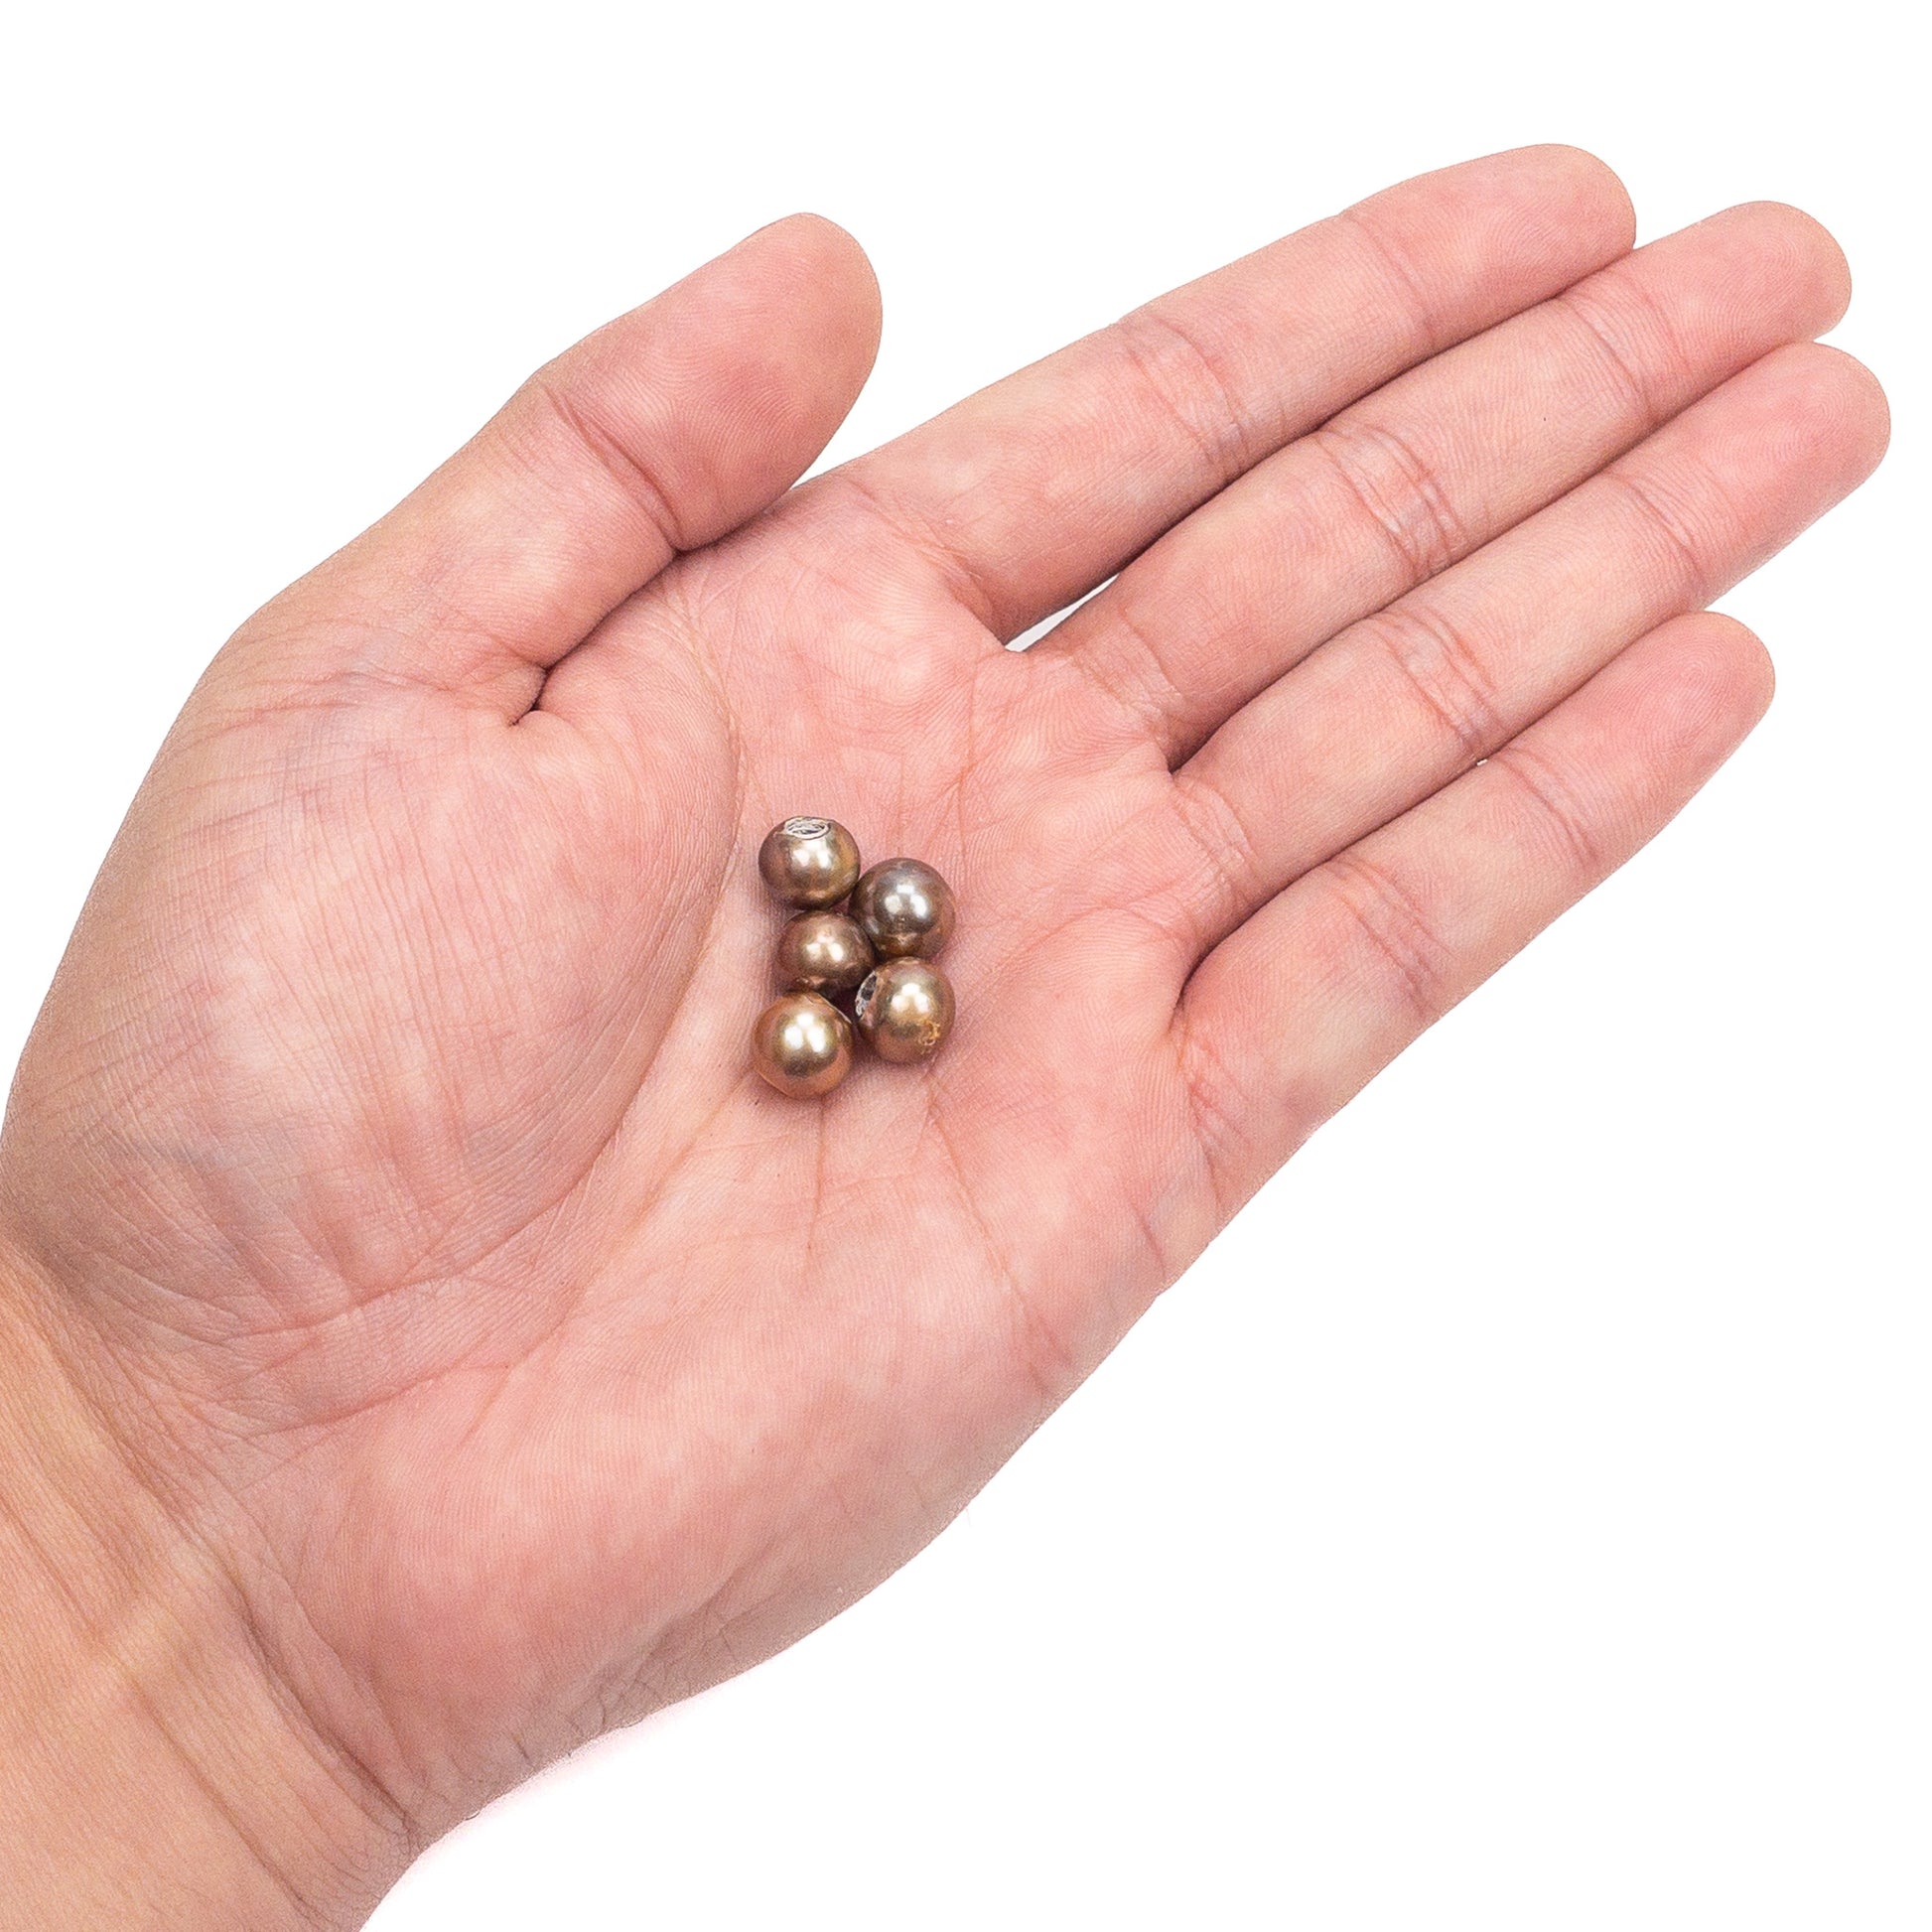 Golden Olive 9mm Potato with Large Hole Freshwater Pearl Bead (3 Quantities Available)